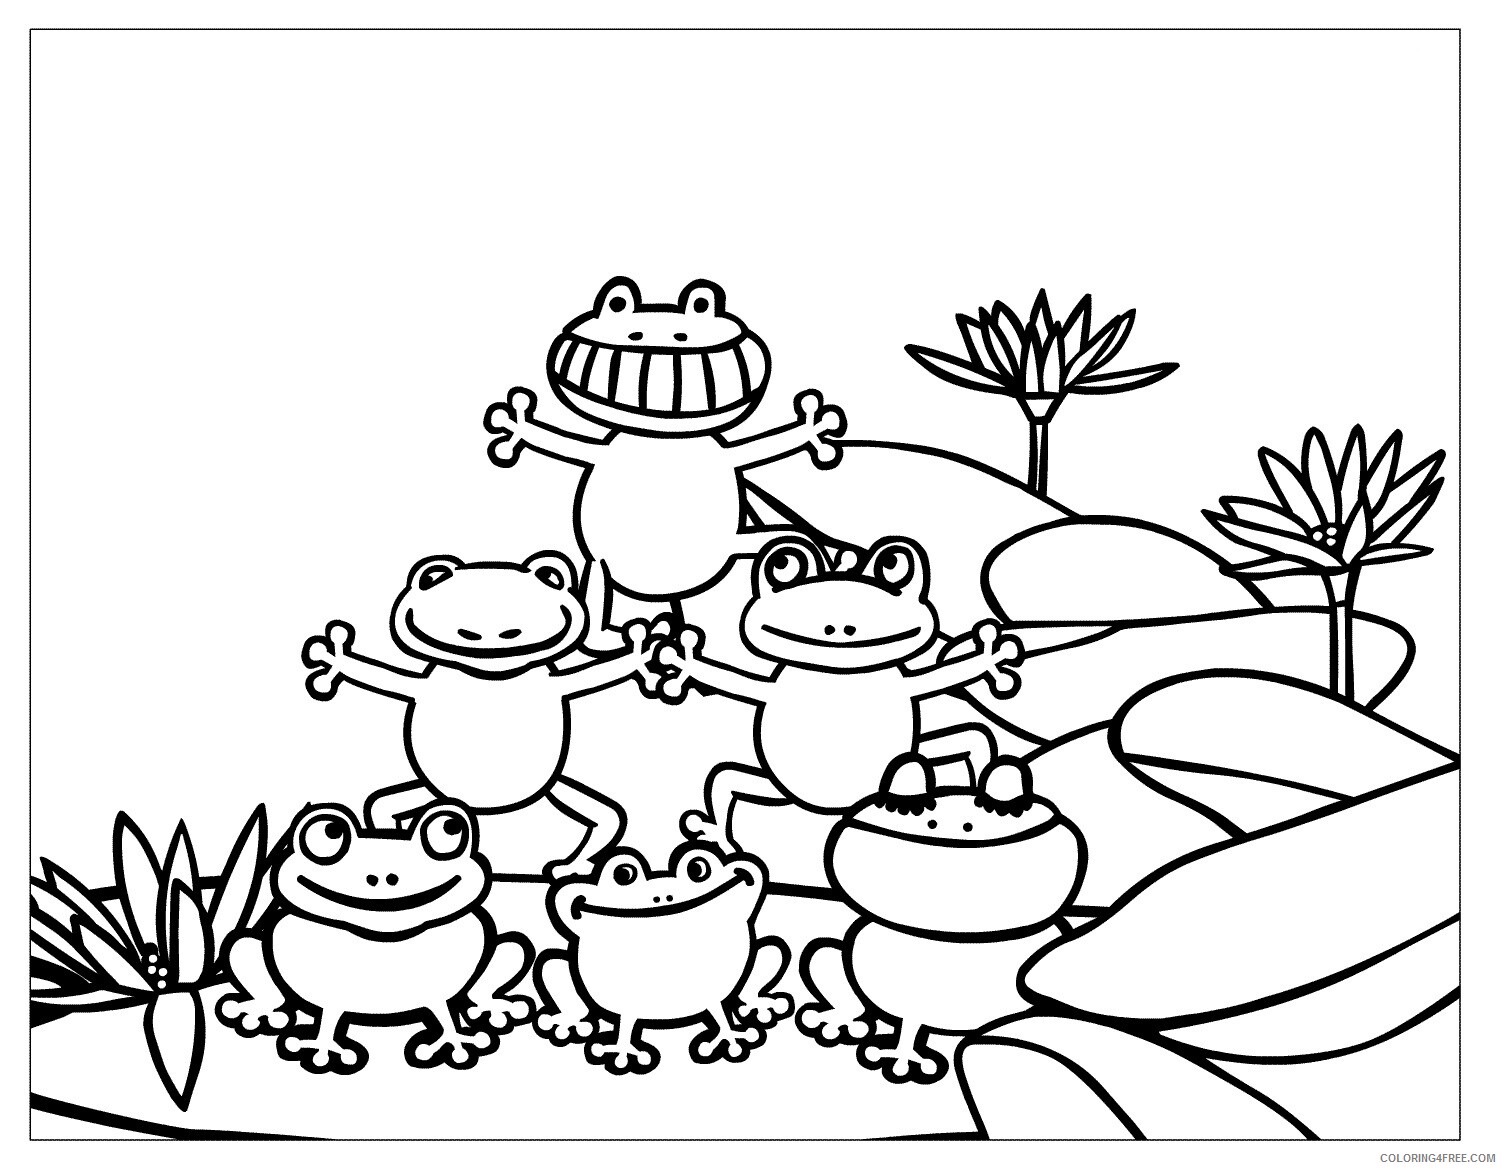 Smiley Face Coloring Pages Smiley Face Printable 2021 5467 Coloring4free